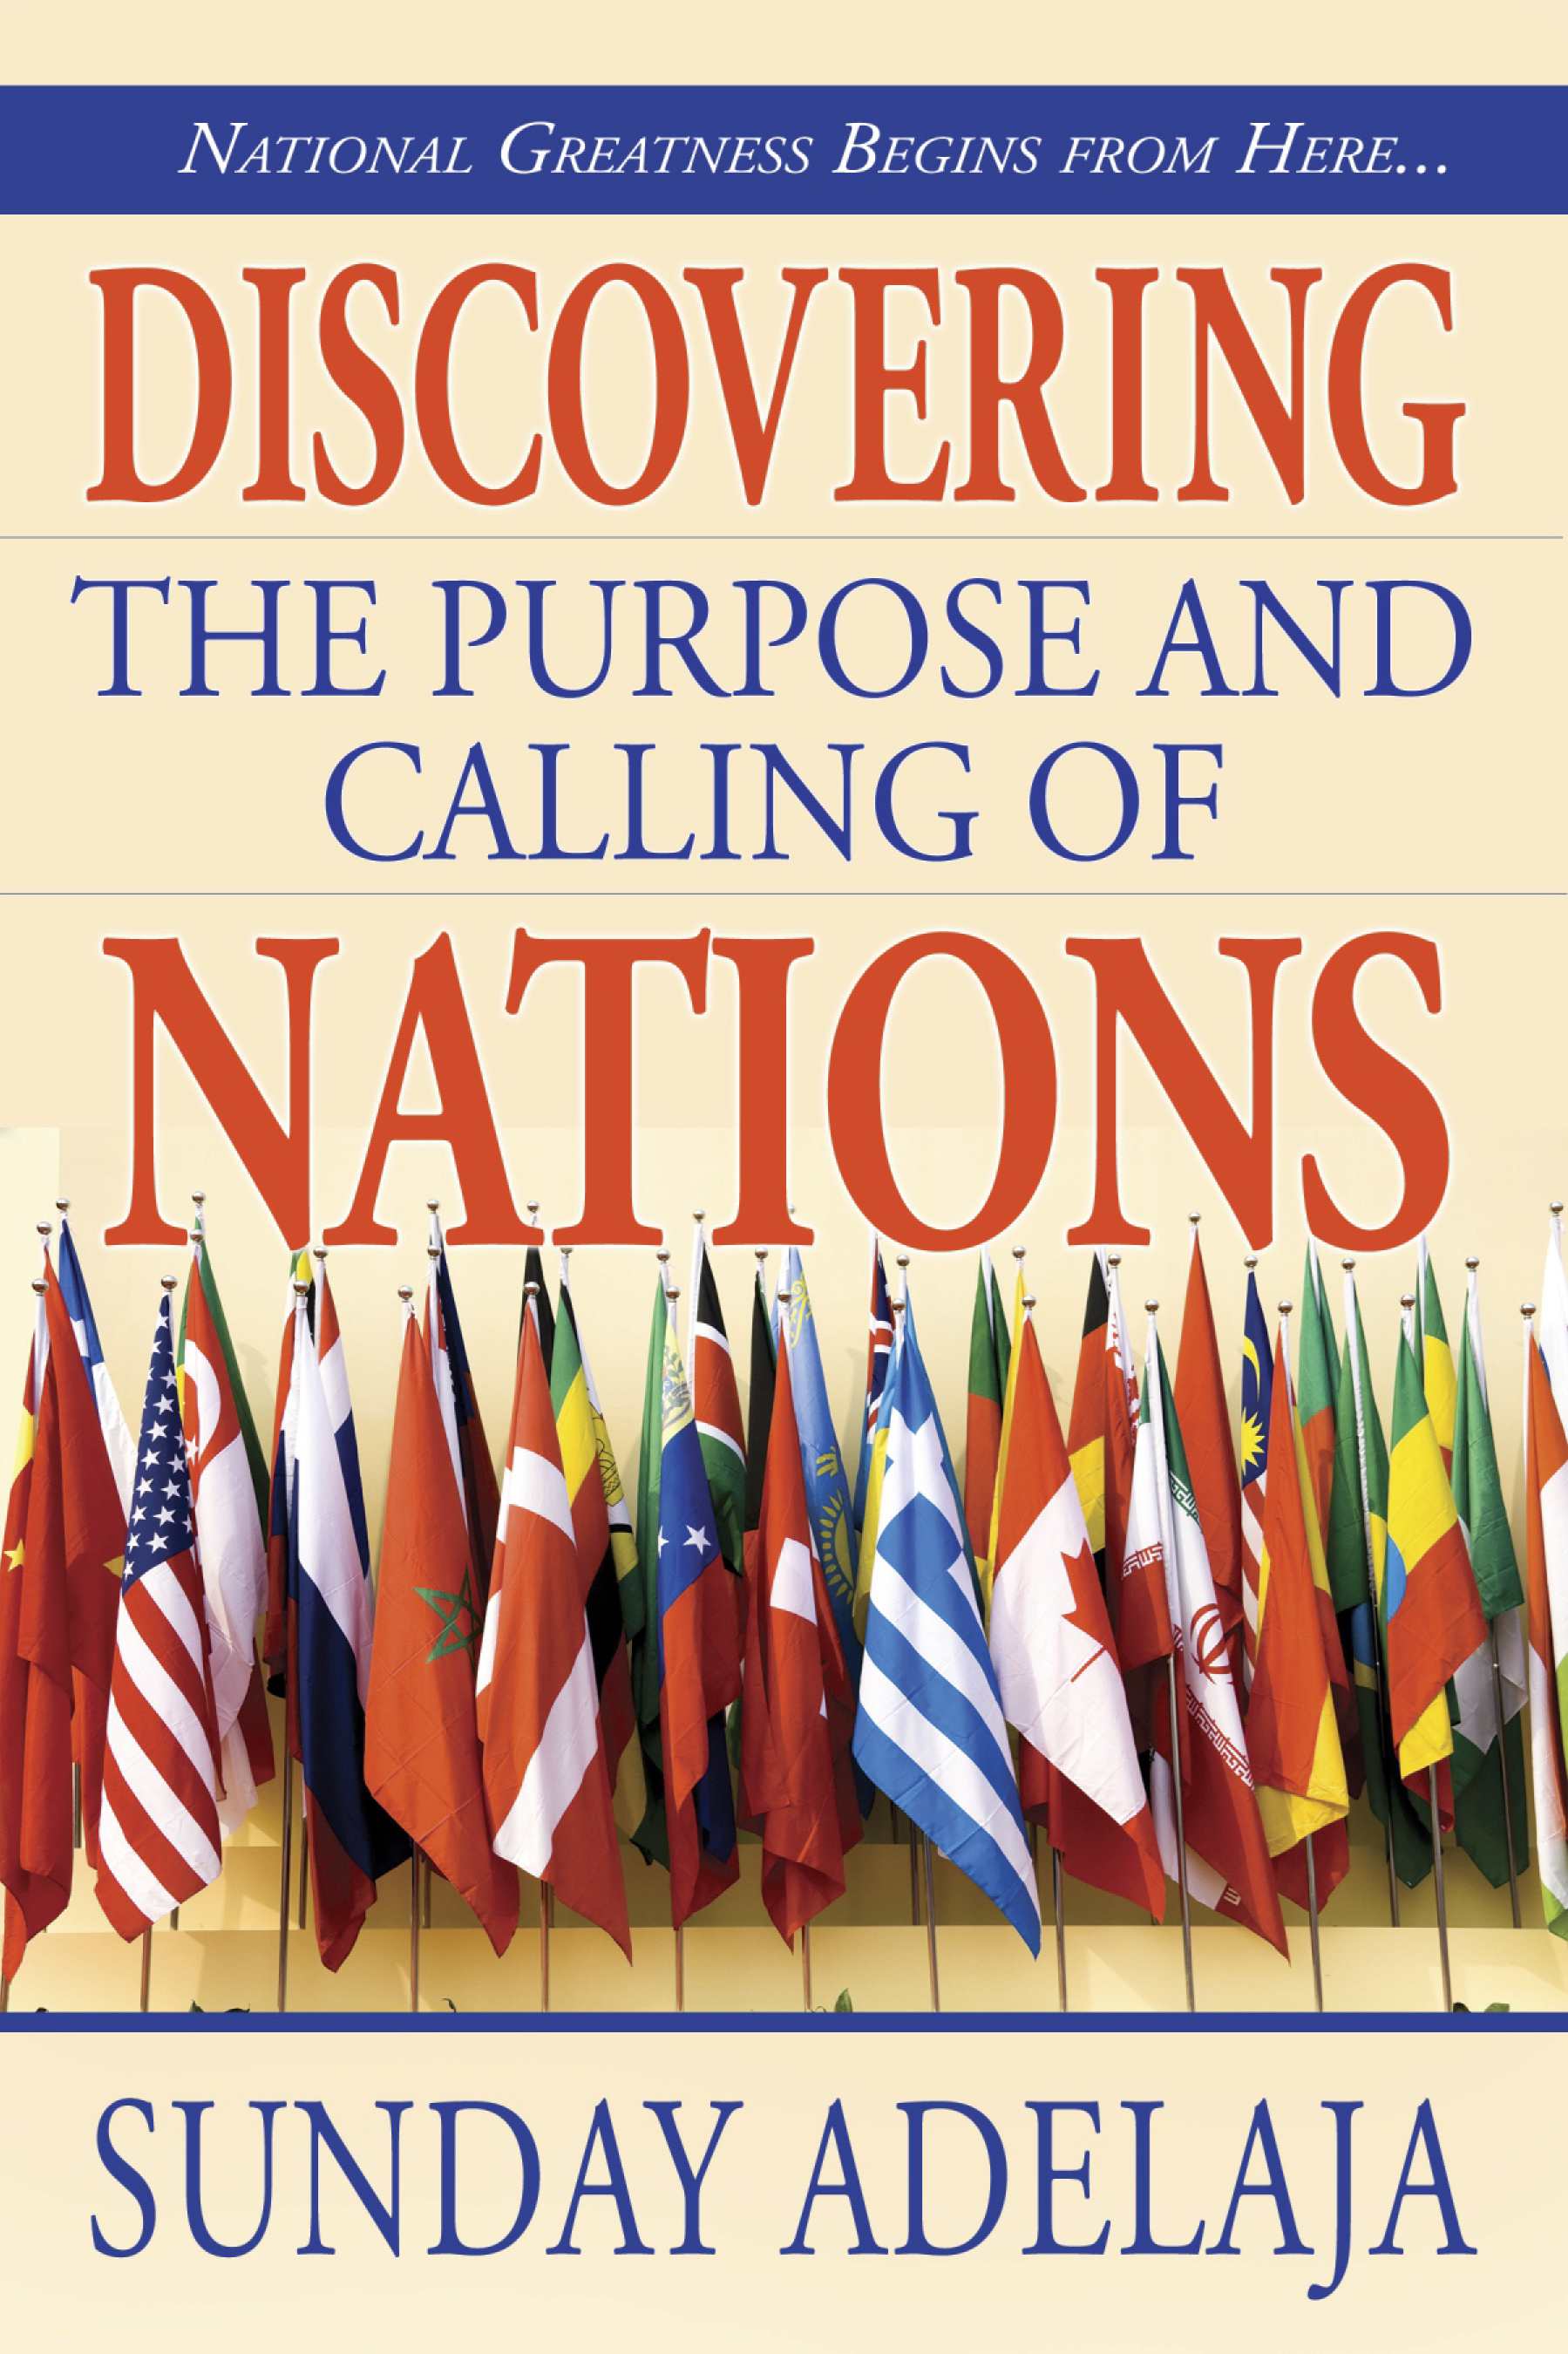 Discovering-the-Purpose-and-Calling-of-Nations--National-Greatness-Starts-From-Here----